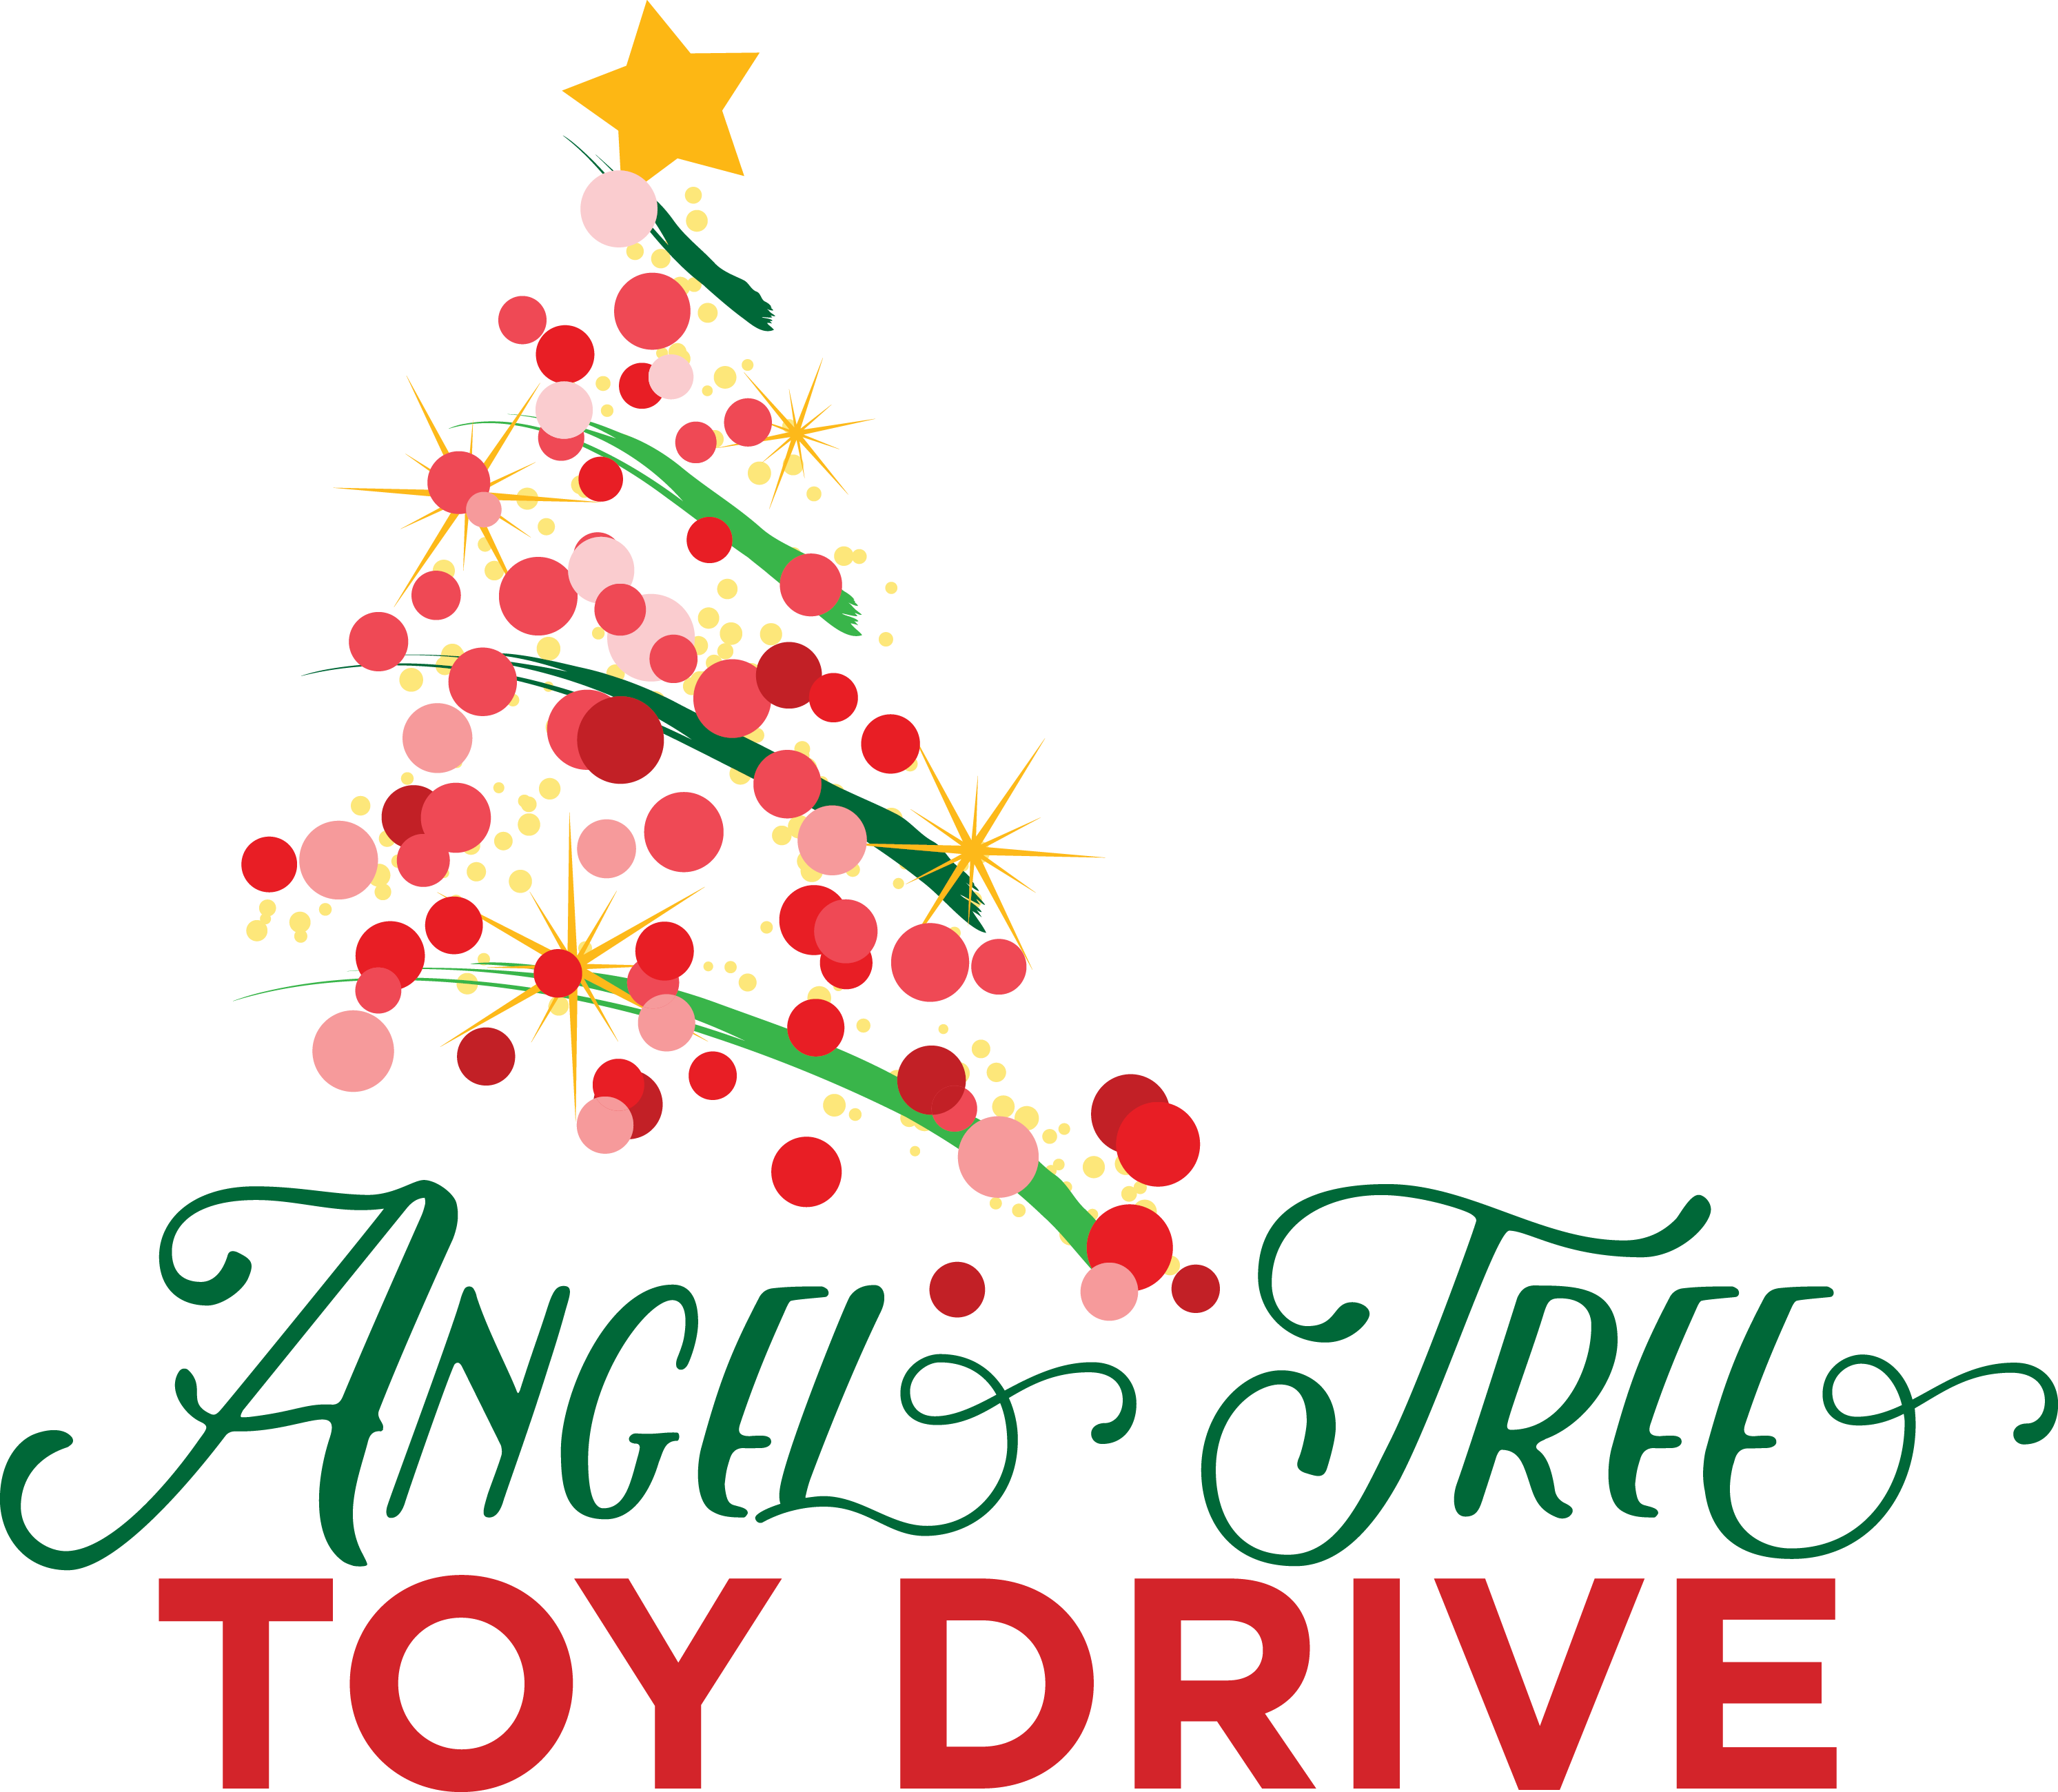 About Angel Tree - Angel Tree Toy Drive Salvation Army (2986x2600)